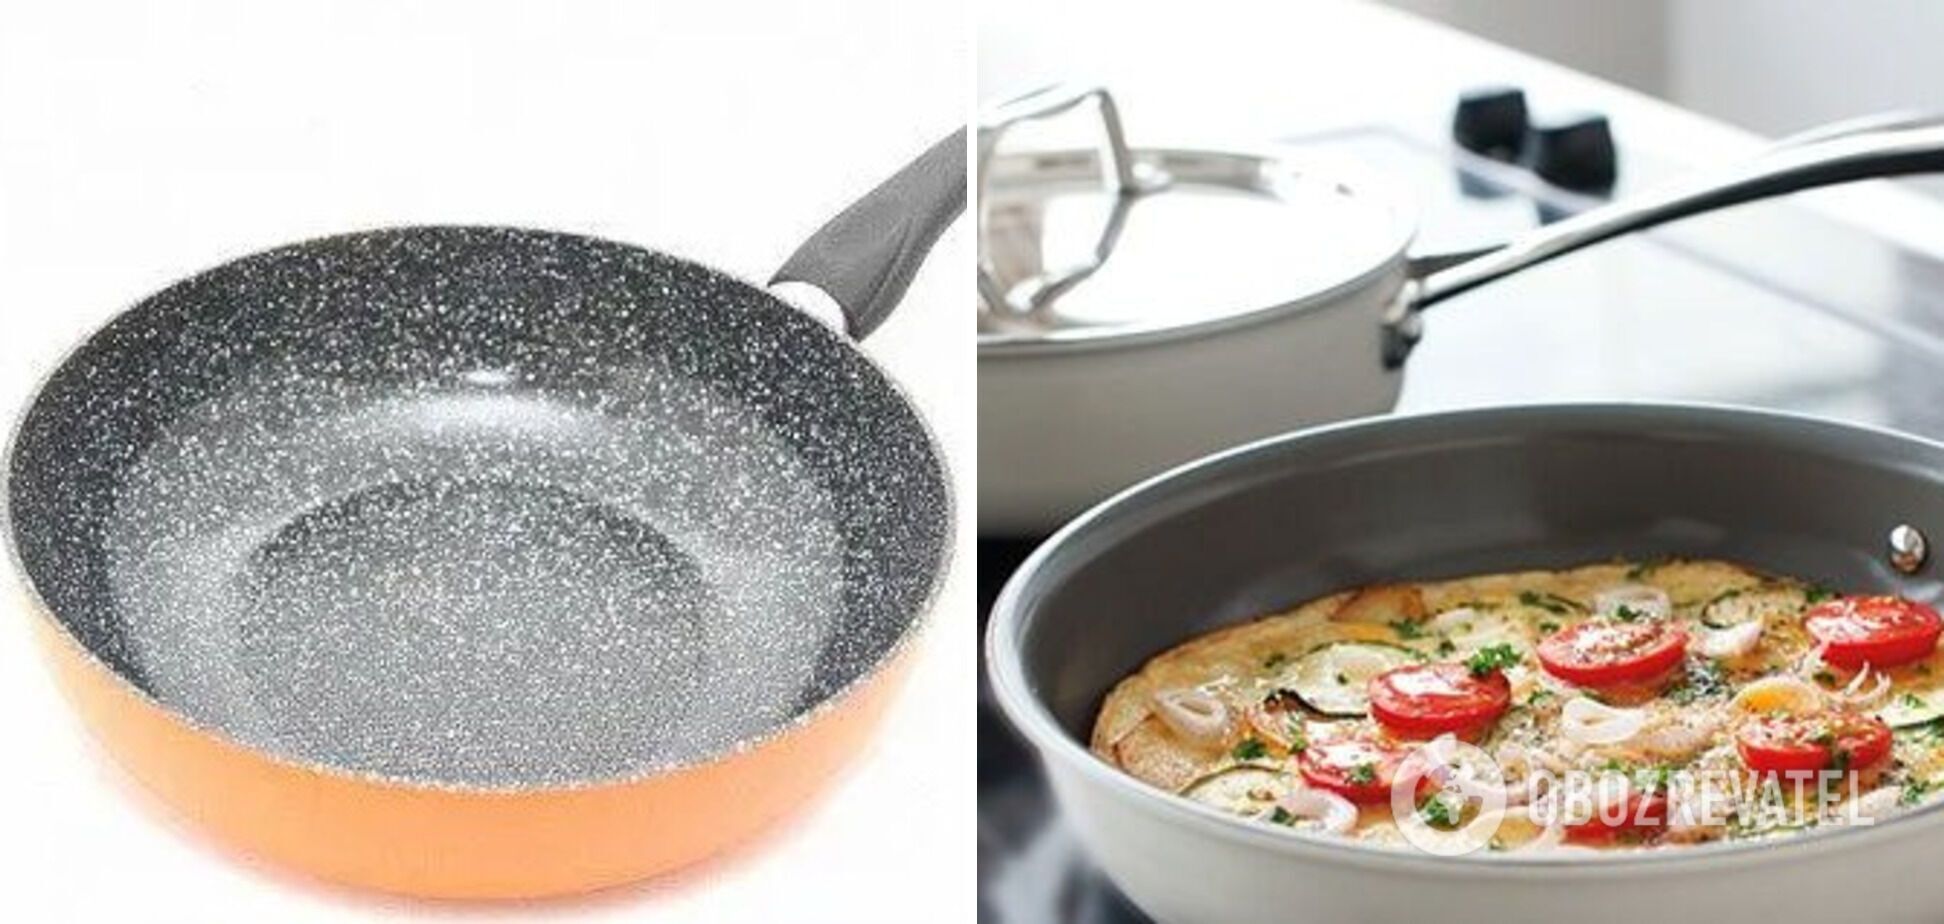 How to clean a ceramic frying pan from carbon deposits